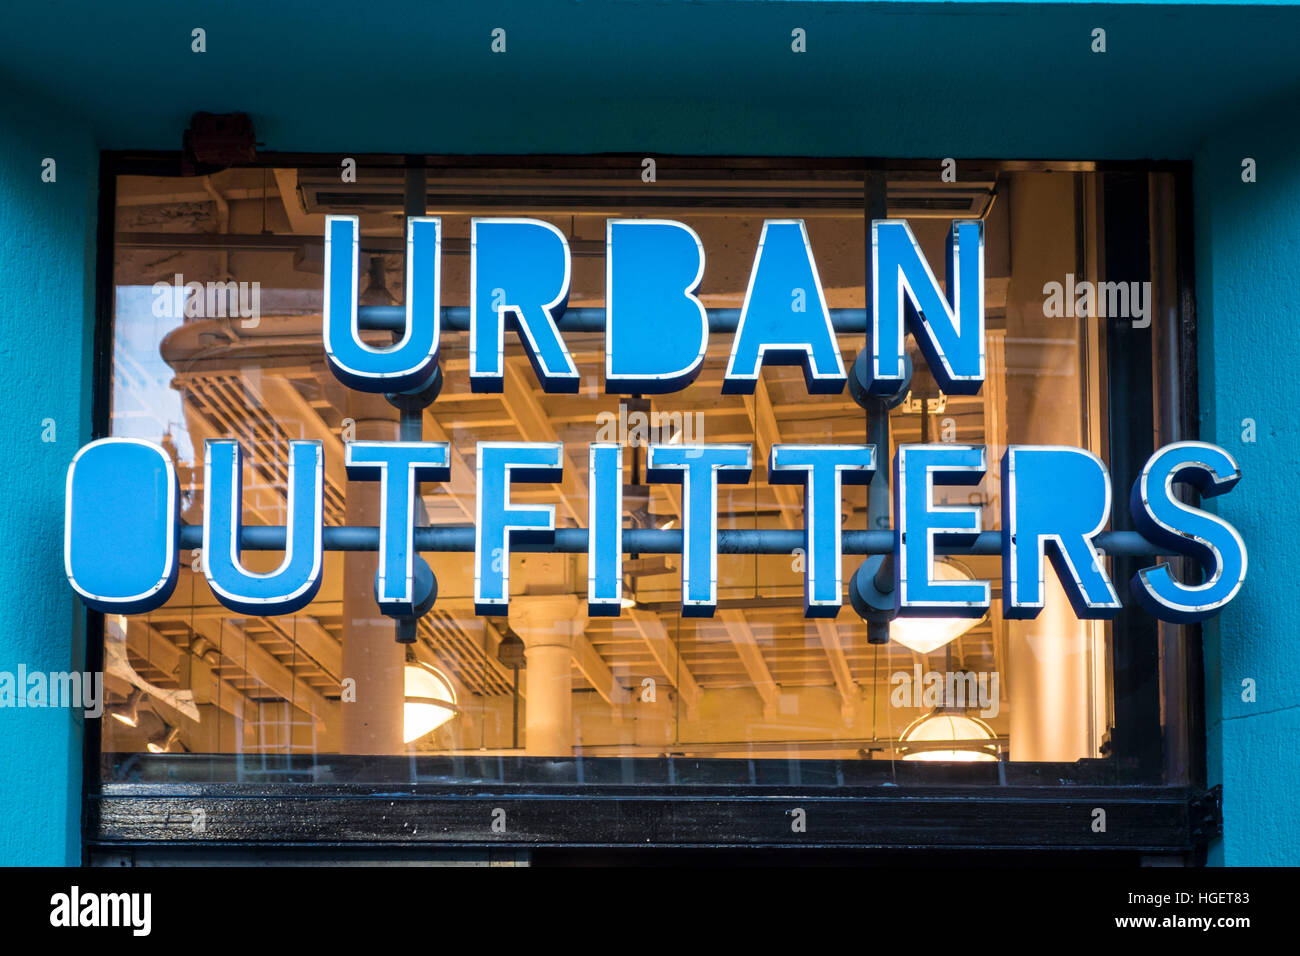 Urban Outfitters Store Shop anmelden, Covent Garden, London, UK Stockfoto